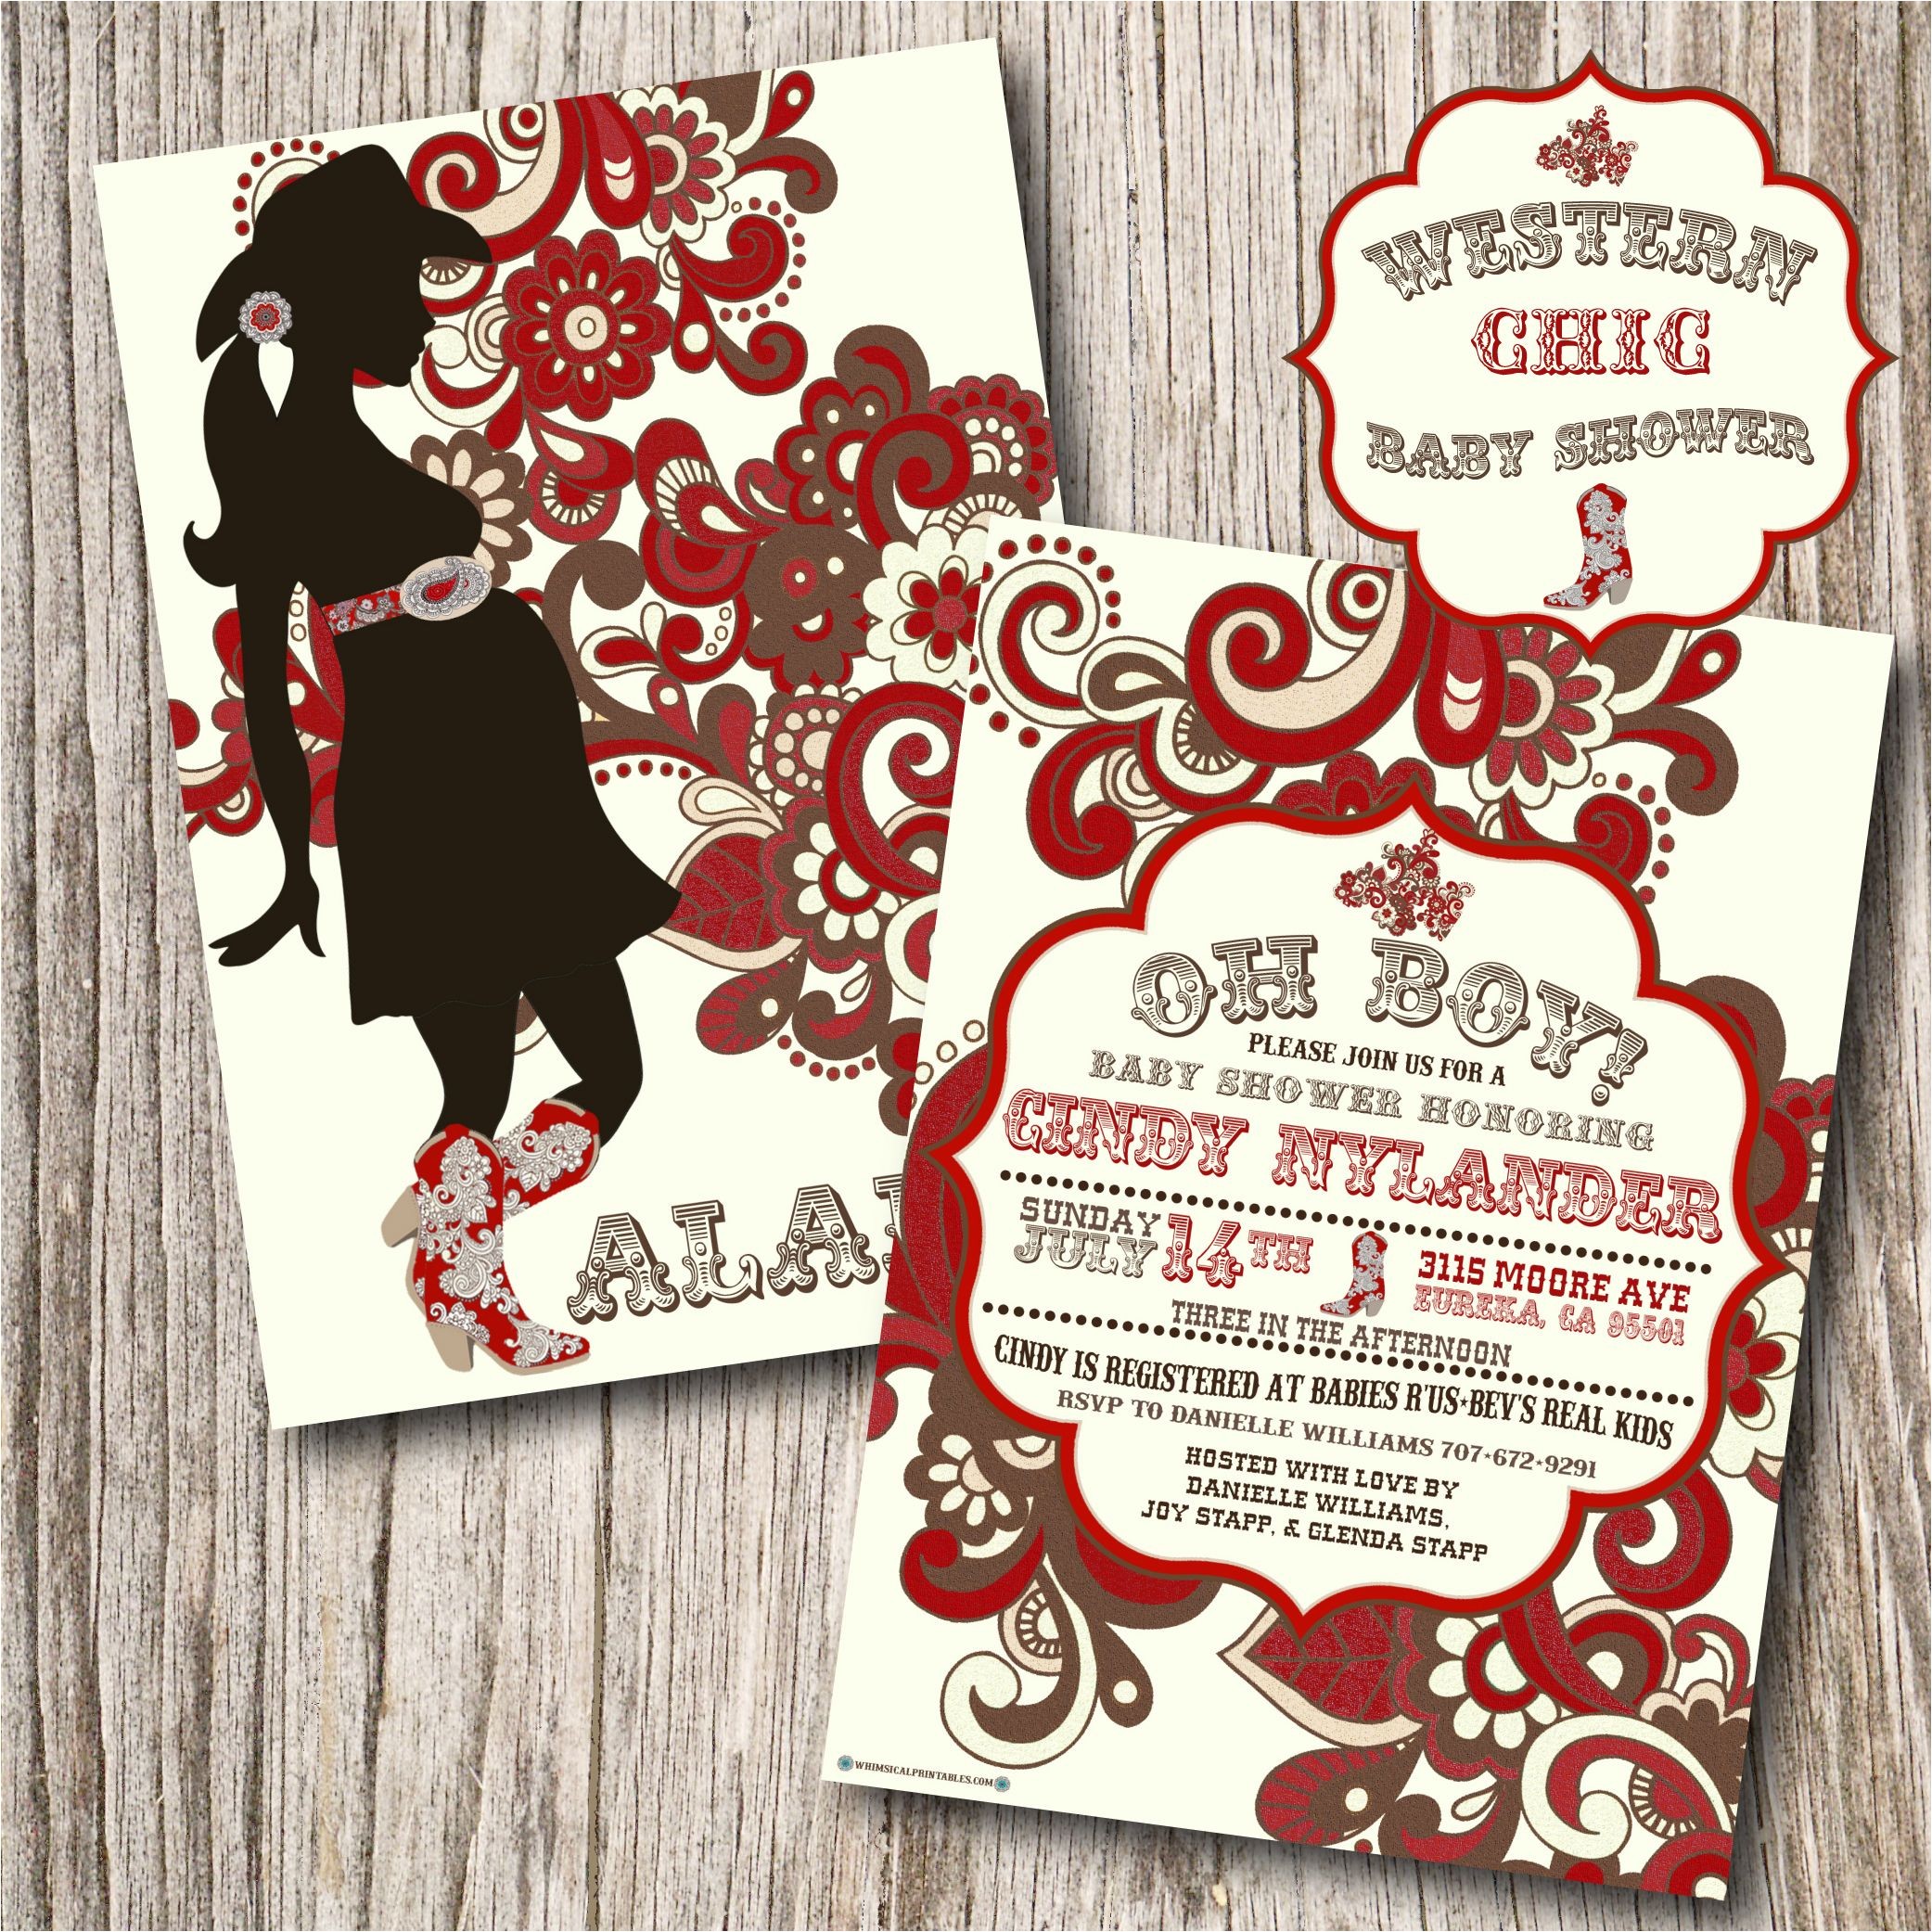 Cowboy themed Baby Shower Invitations Natural Western Baby Shower theme Ideas and Cowboy themed